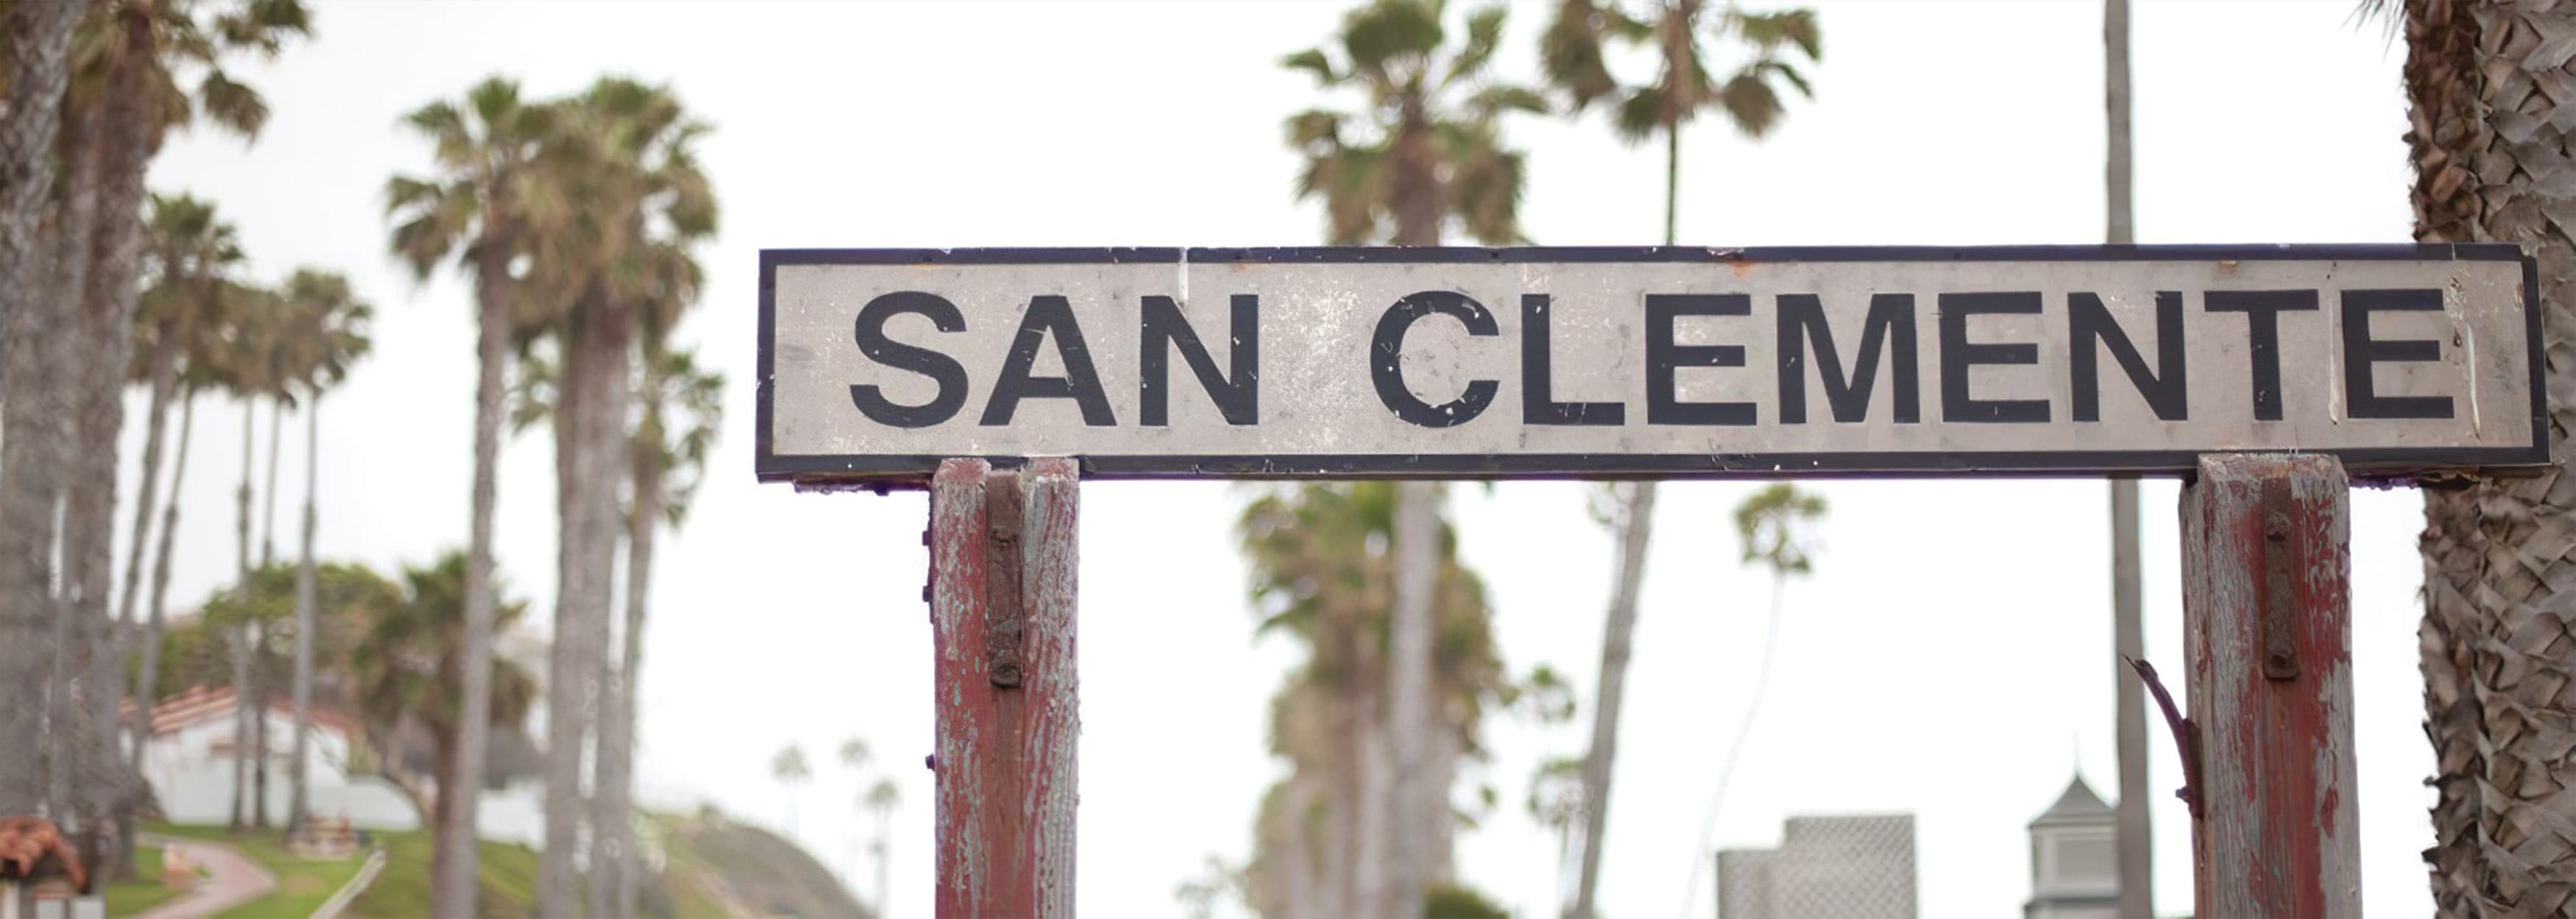 A photograph of a roadside sign in San Clemente, California.